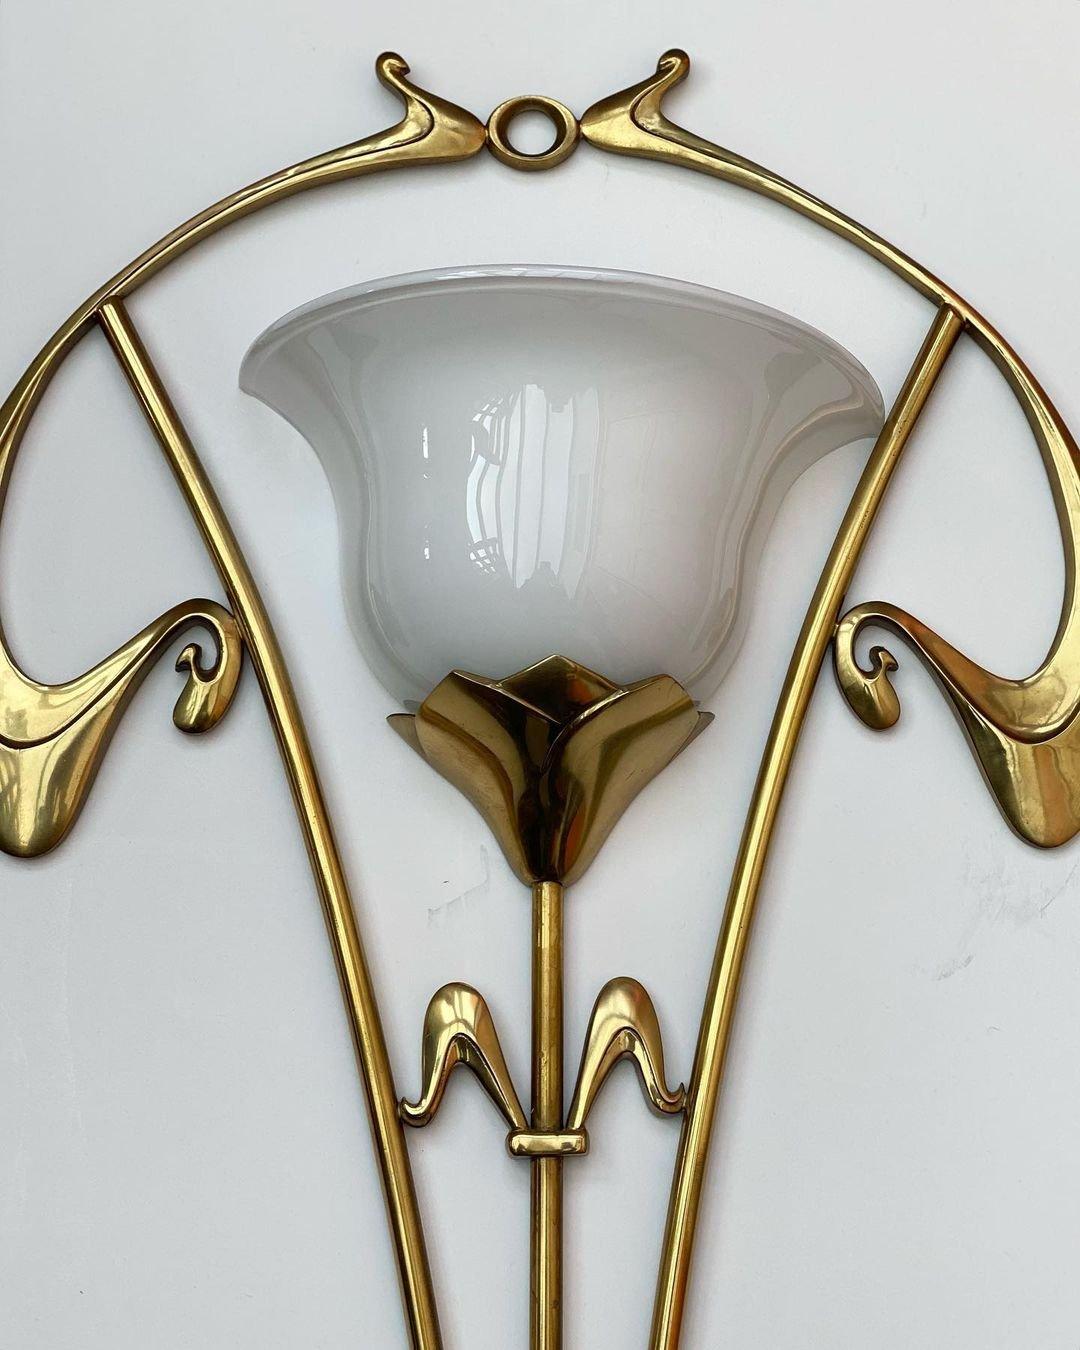 Delightful Art Nouveau style sconce.

Stunning Italian Flush mount light made of full shiny brass frame with opaline glass diffuser. The light can be mounted as wall lamp. The brass has a fantastic shiny vintage patina.


Marvelous work of art as